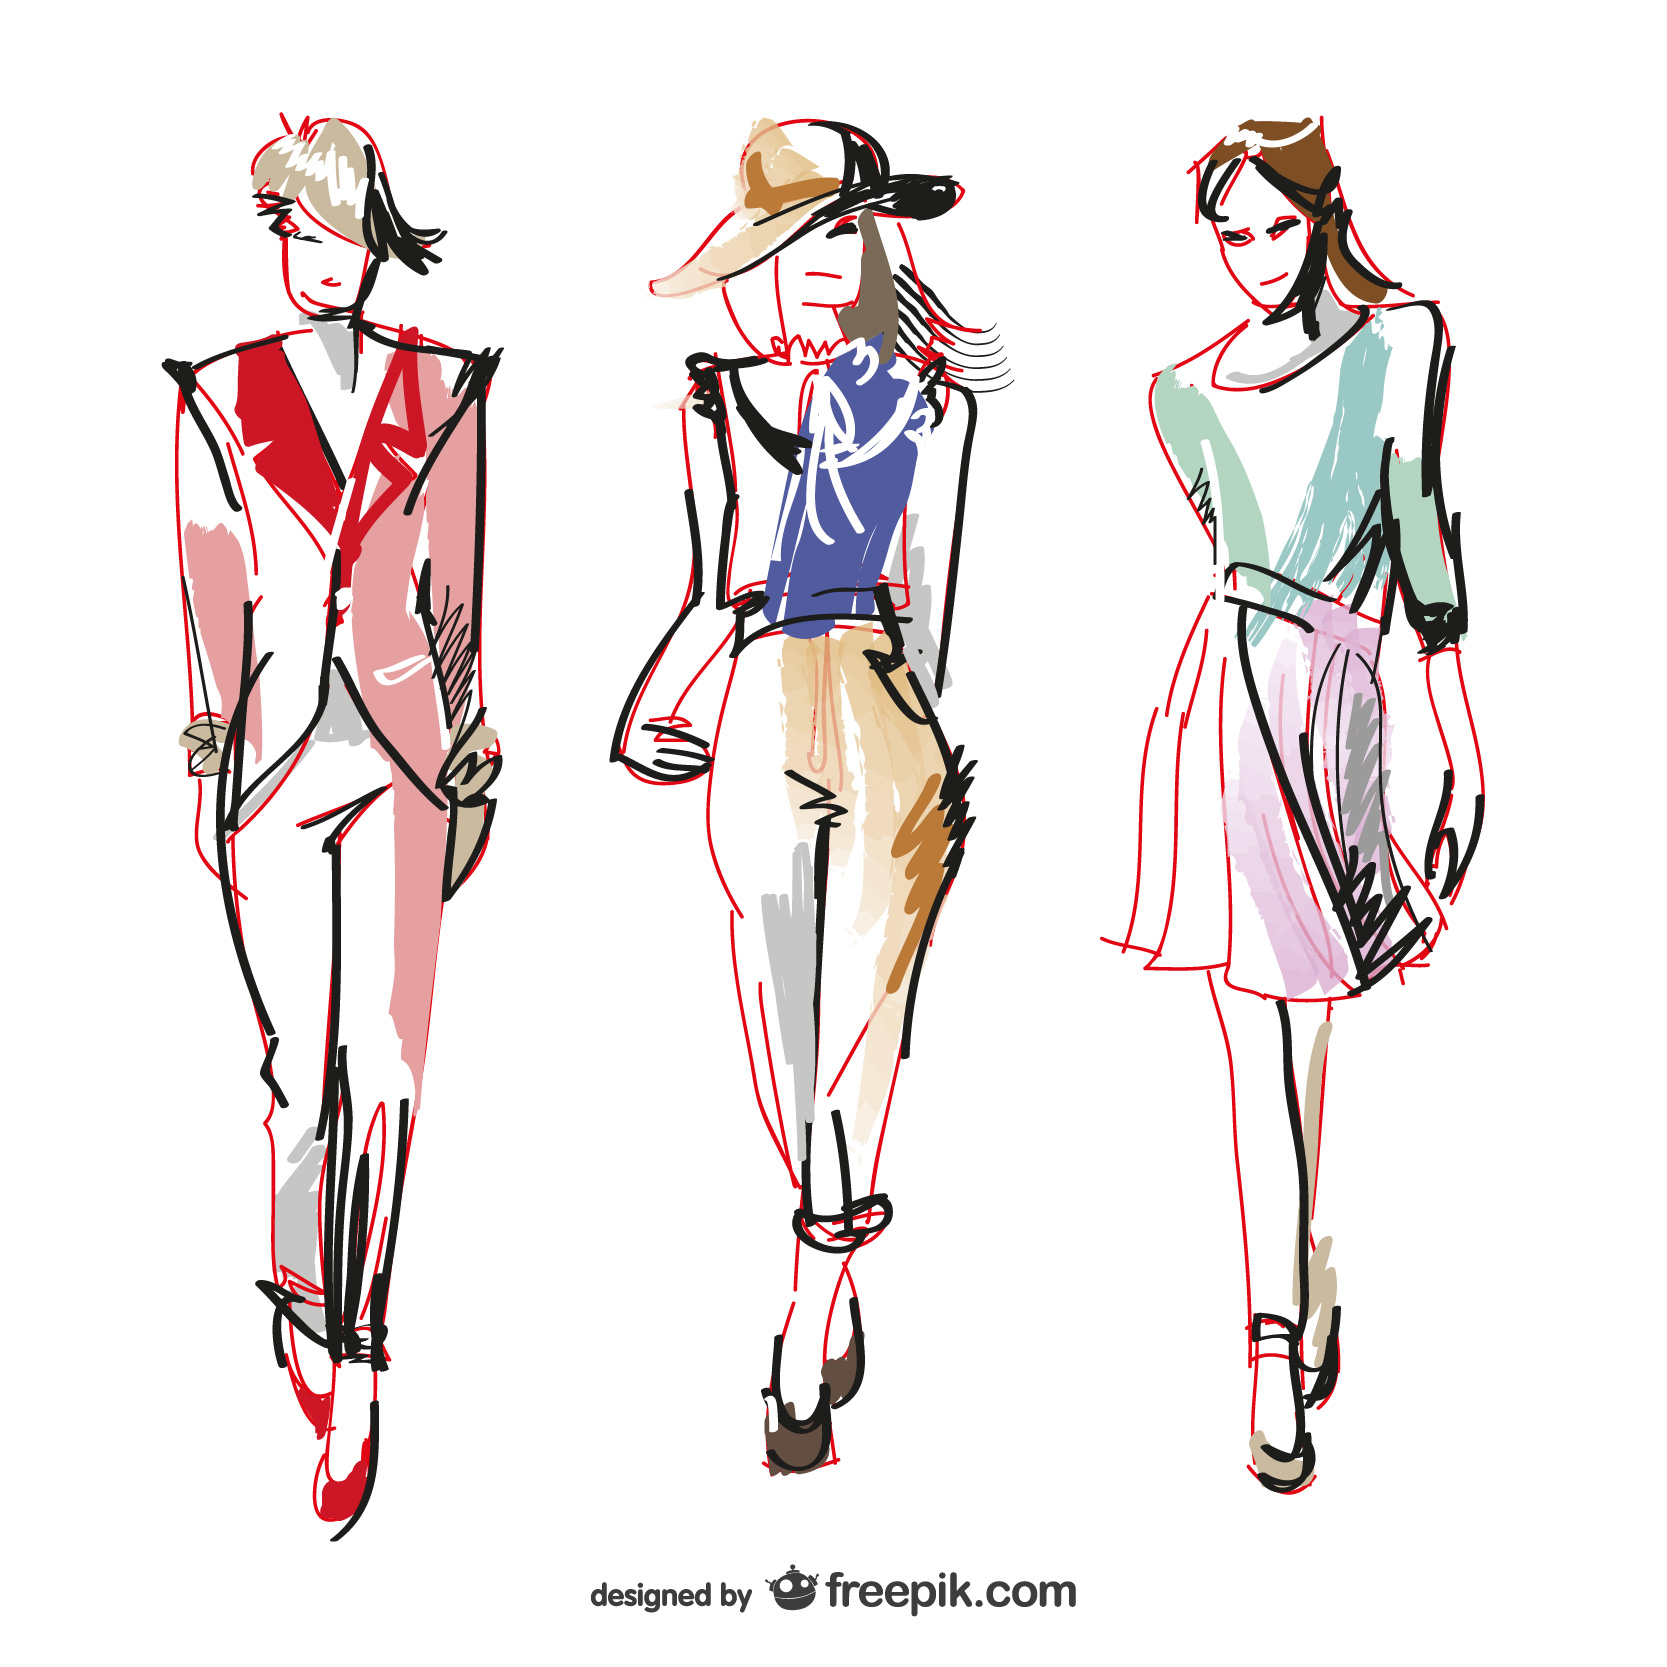 Image shows a sketch of 3 fashion models while walking